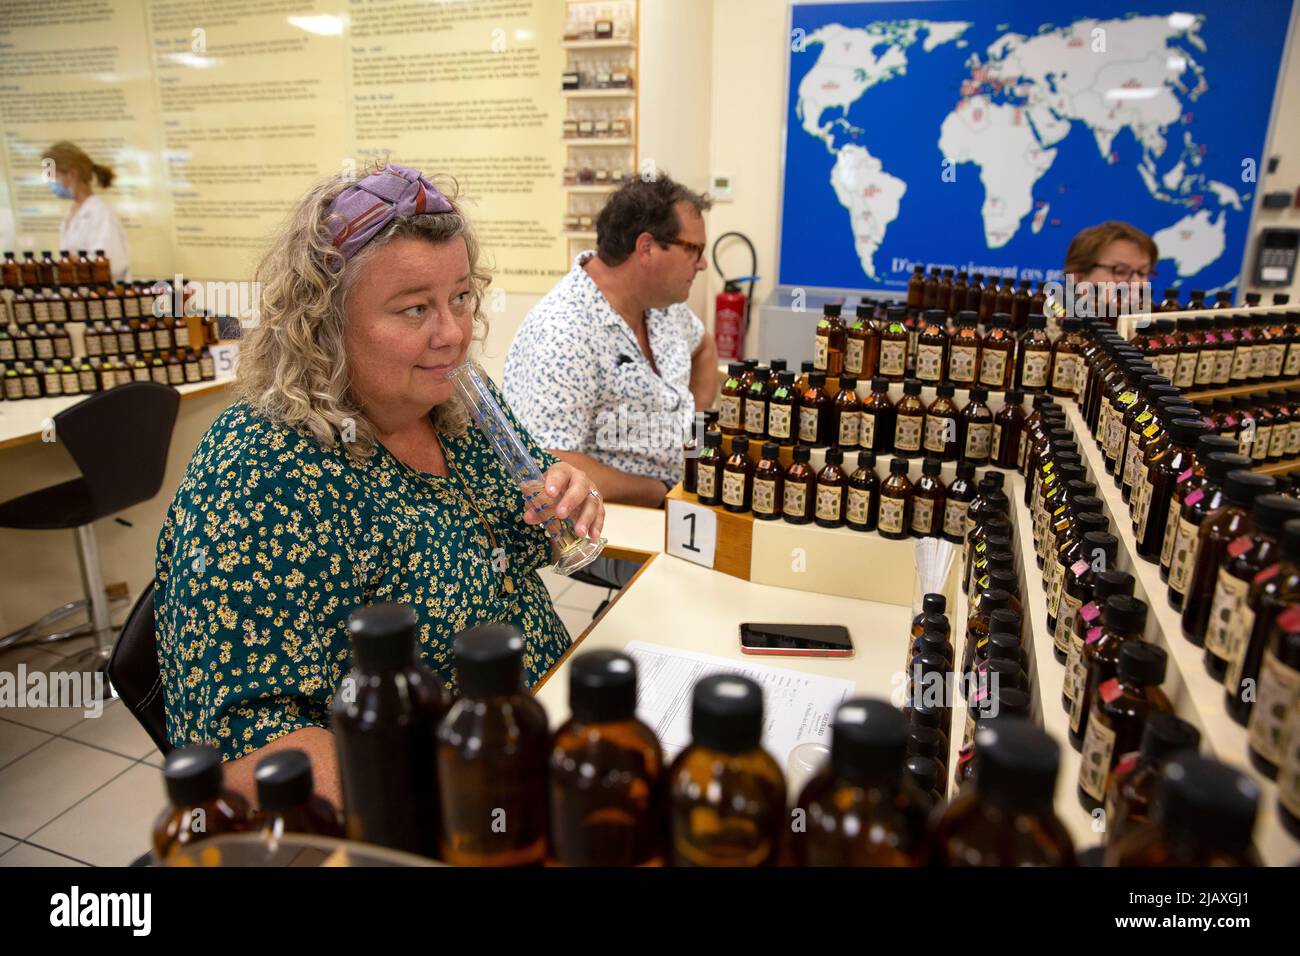 Mariska Lokker (L), 49, and her husband Paul Lokker (R), 45, both tourists from the Netherlands, creating their own fragrance during a workshop at the Galimard Studio des Fragrances in Grasse, France on September 10, 2021. Grasse has had a prospering perfume industry since the end of the 18th century and is considered the world's capital of perfume. There are numerous of old 'parfumeries' in Grasse, such as Galimard, Molinard and Fragonard, each with tours and a museum. Many 'noses' ('Les nez' in French) are trained or have spent time in Grasse to distinguish over 2,000 kinds of scent. Grasse Stock Photo